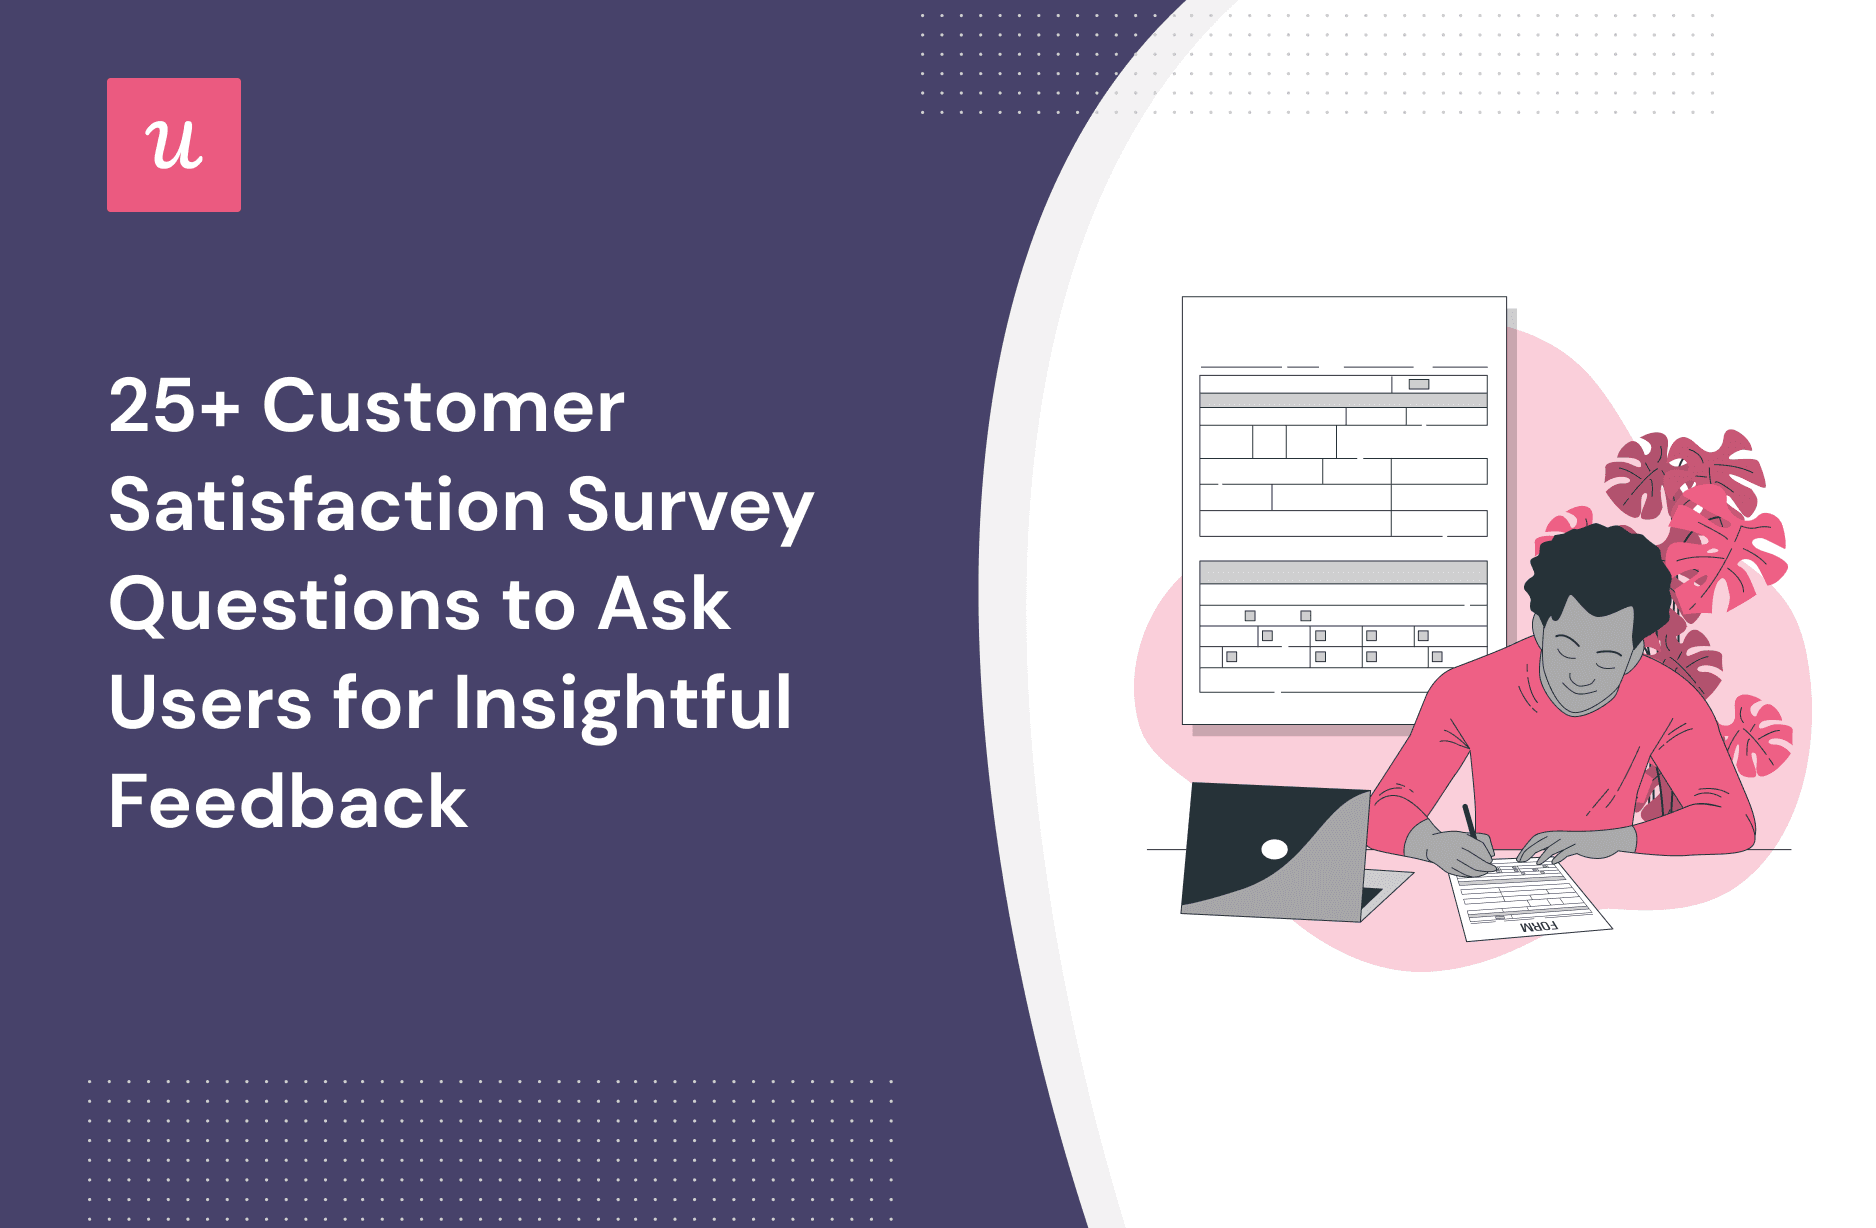 25+ Customer Satisfaction Survey Questions to Ask Users for Insightful Feedback cover